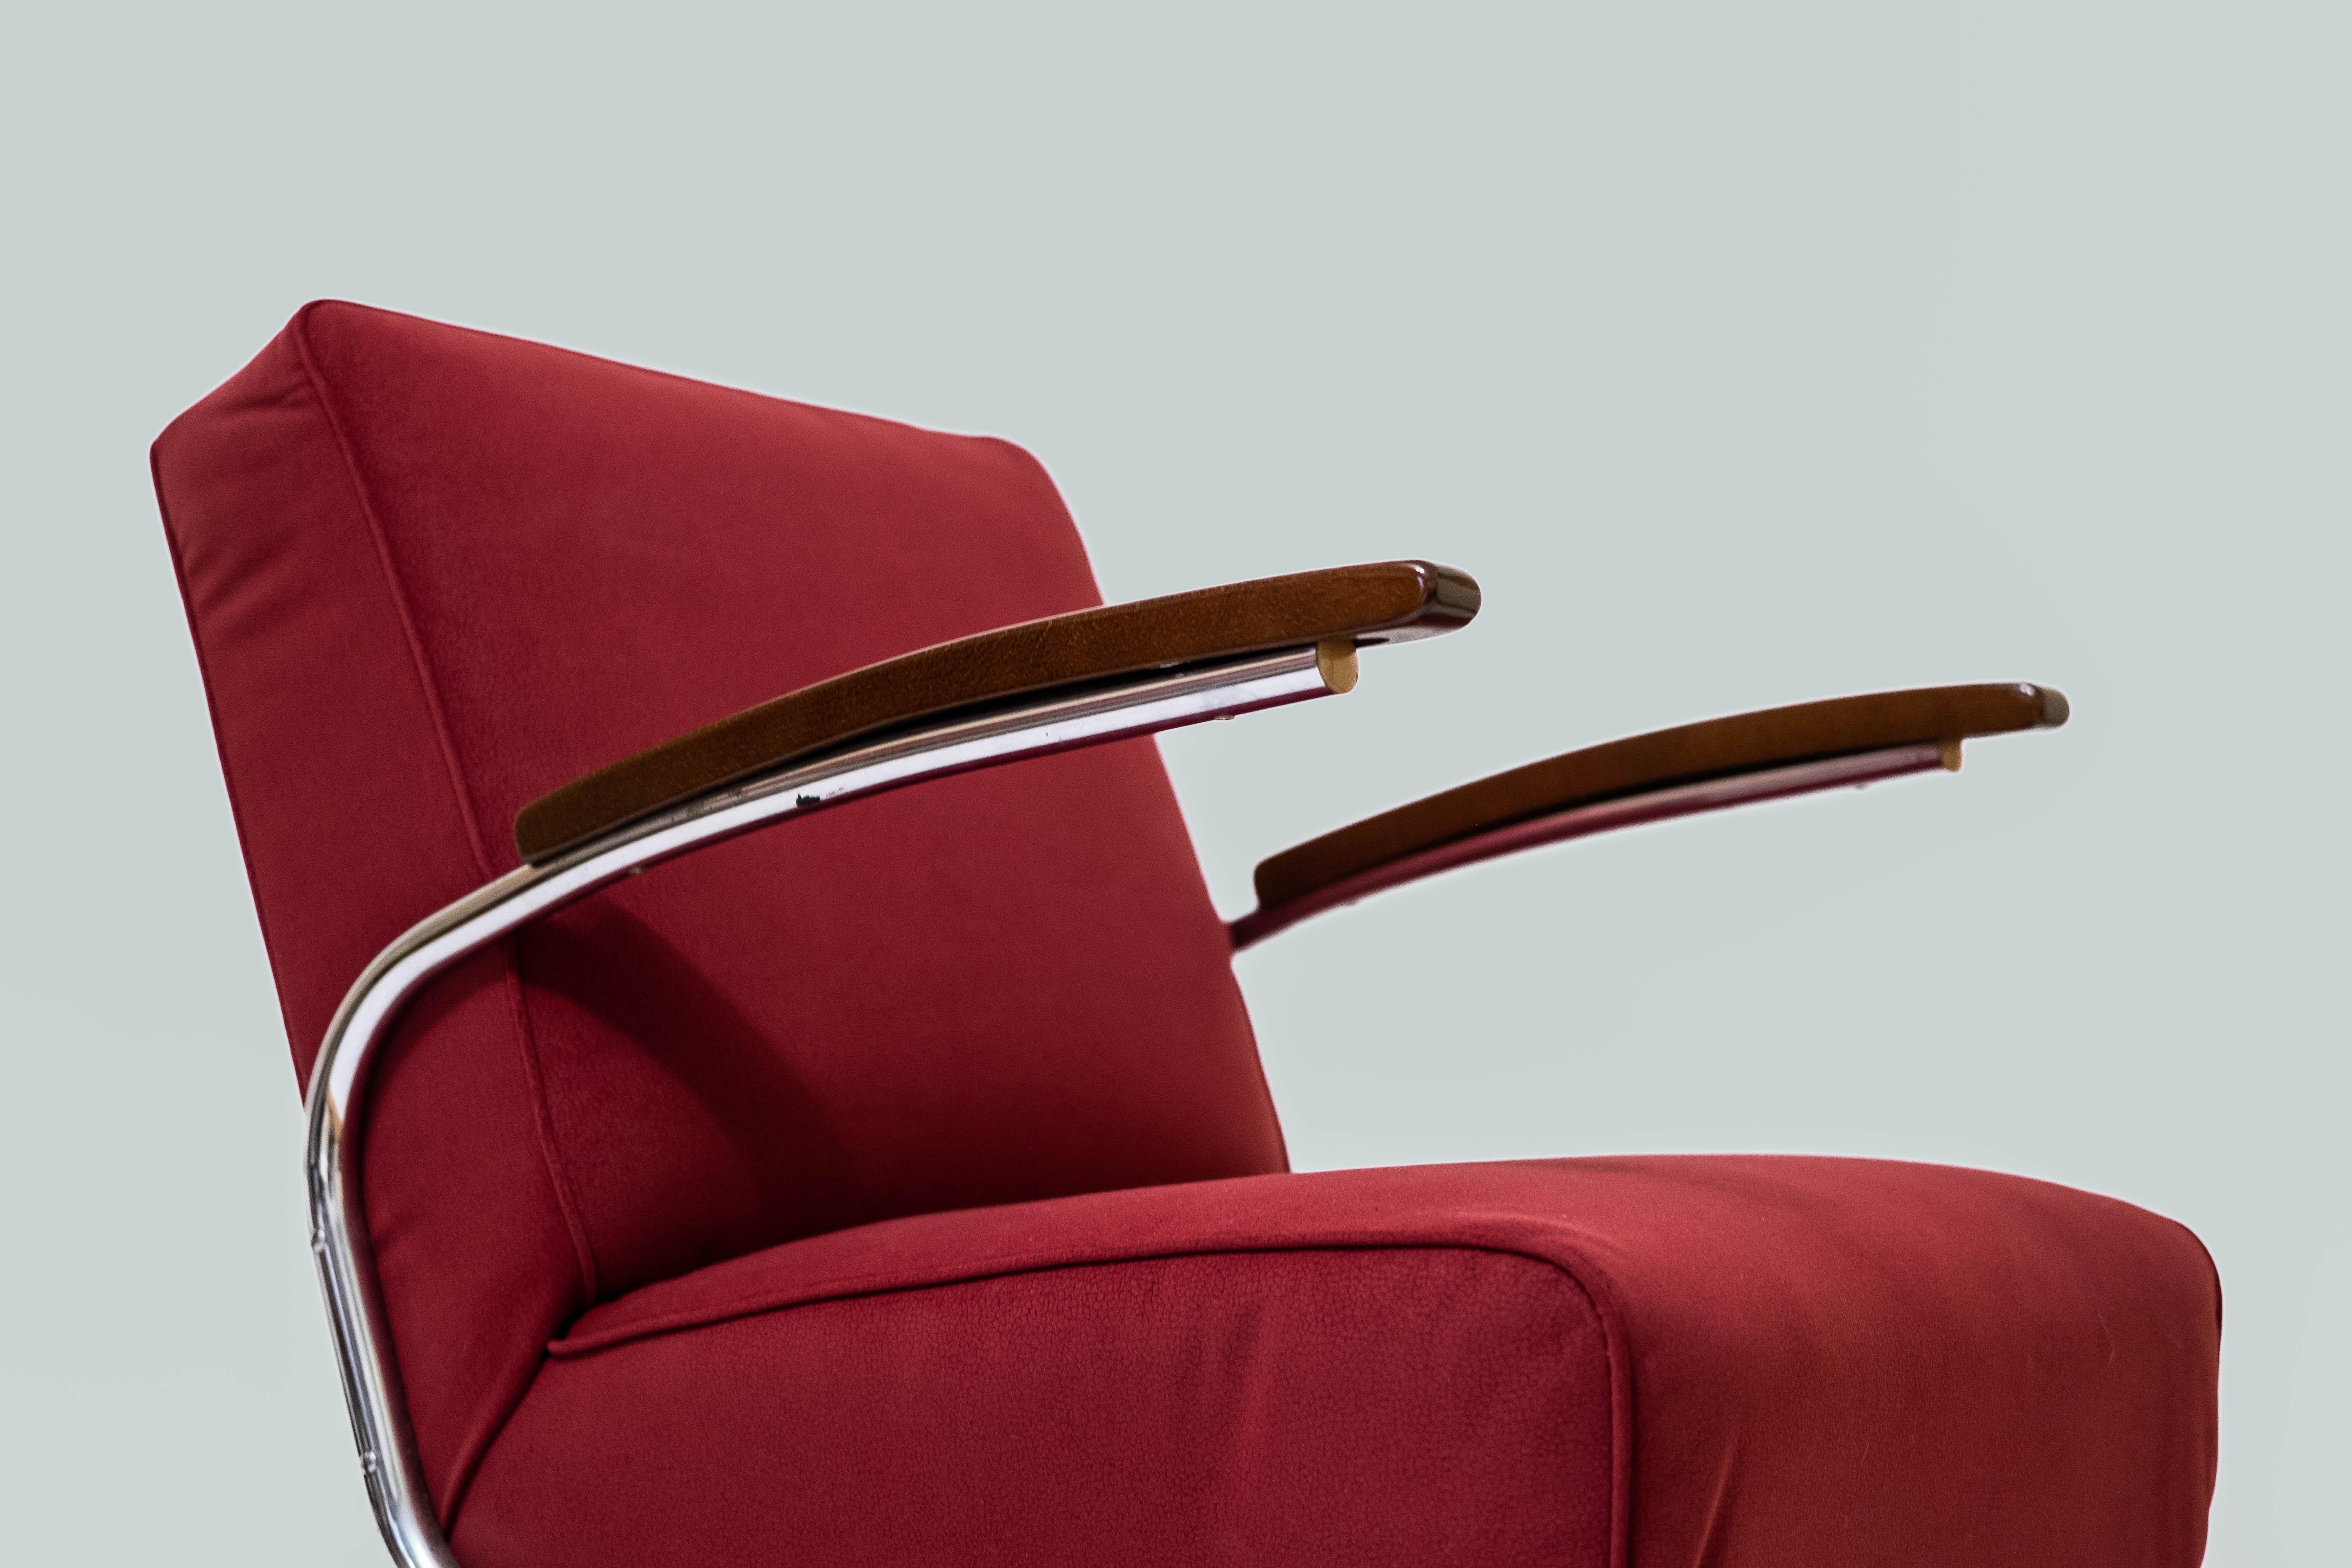 Bauhaus Steelpipe-Fauteuil by Walter Knoll for Tonet Brothers (Vienna, 1935) For Sale 4